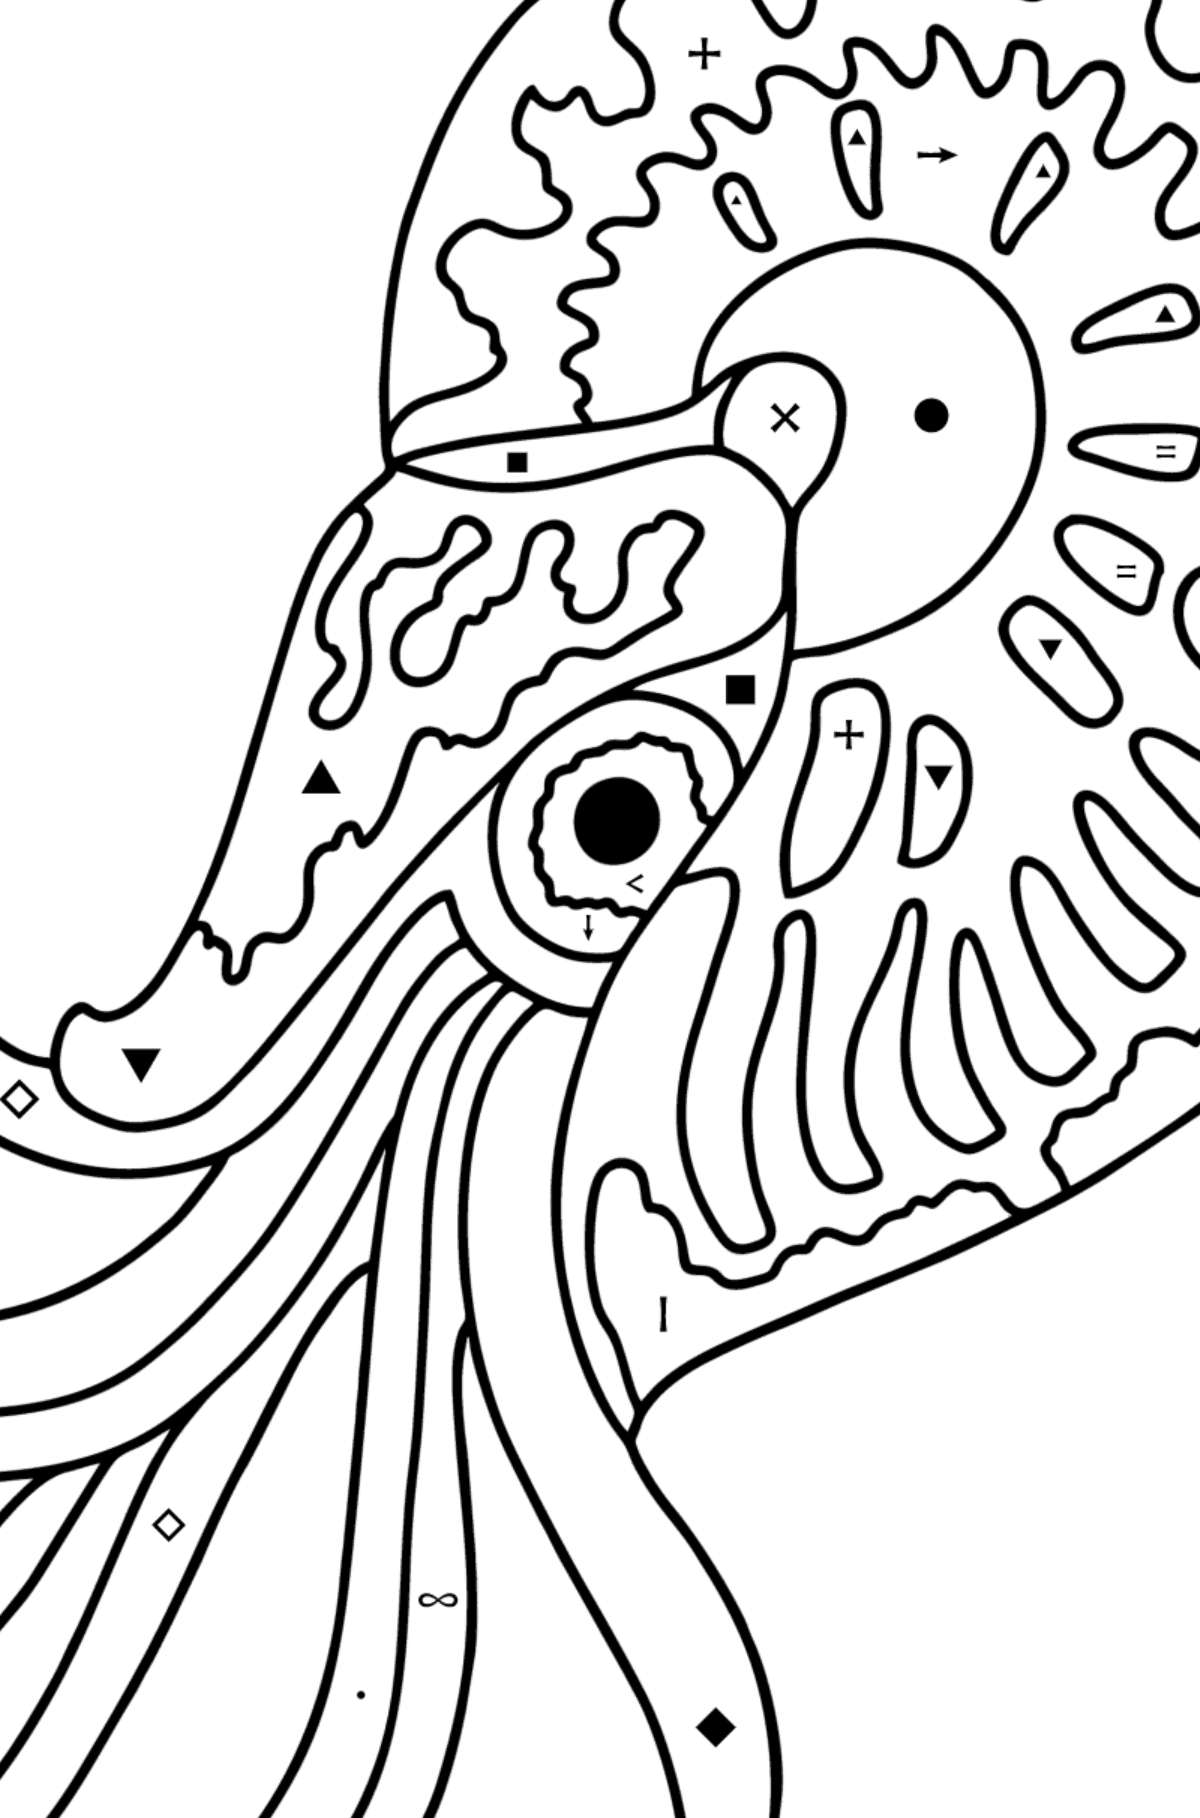 Nautilus coloring page - Coloring by Symbols for Kids